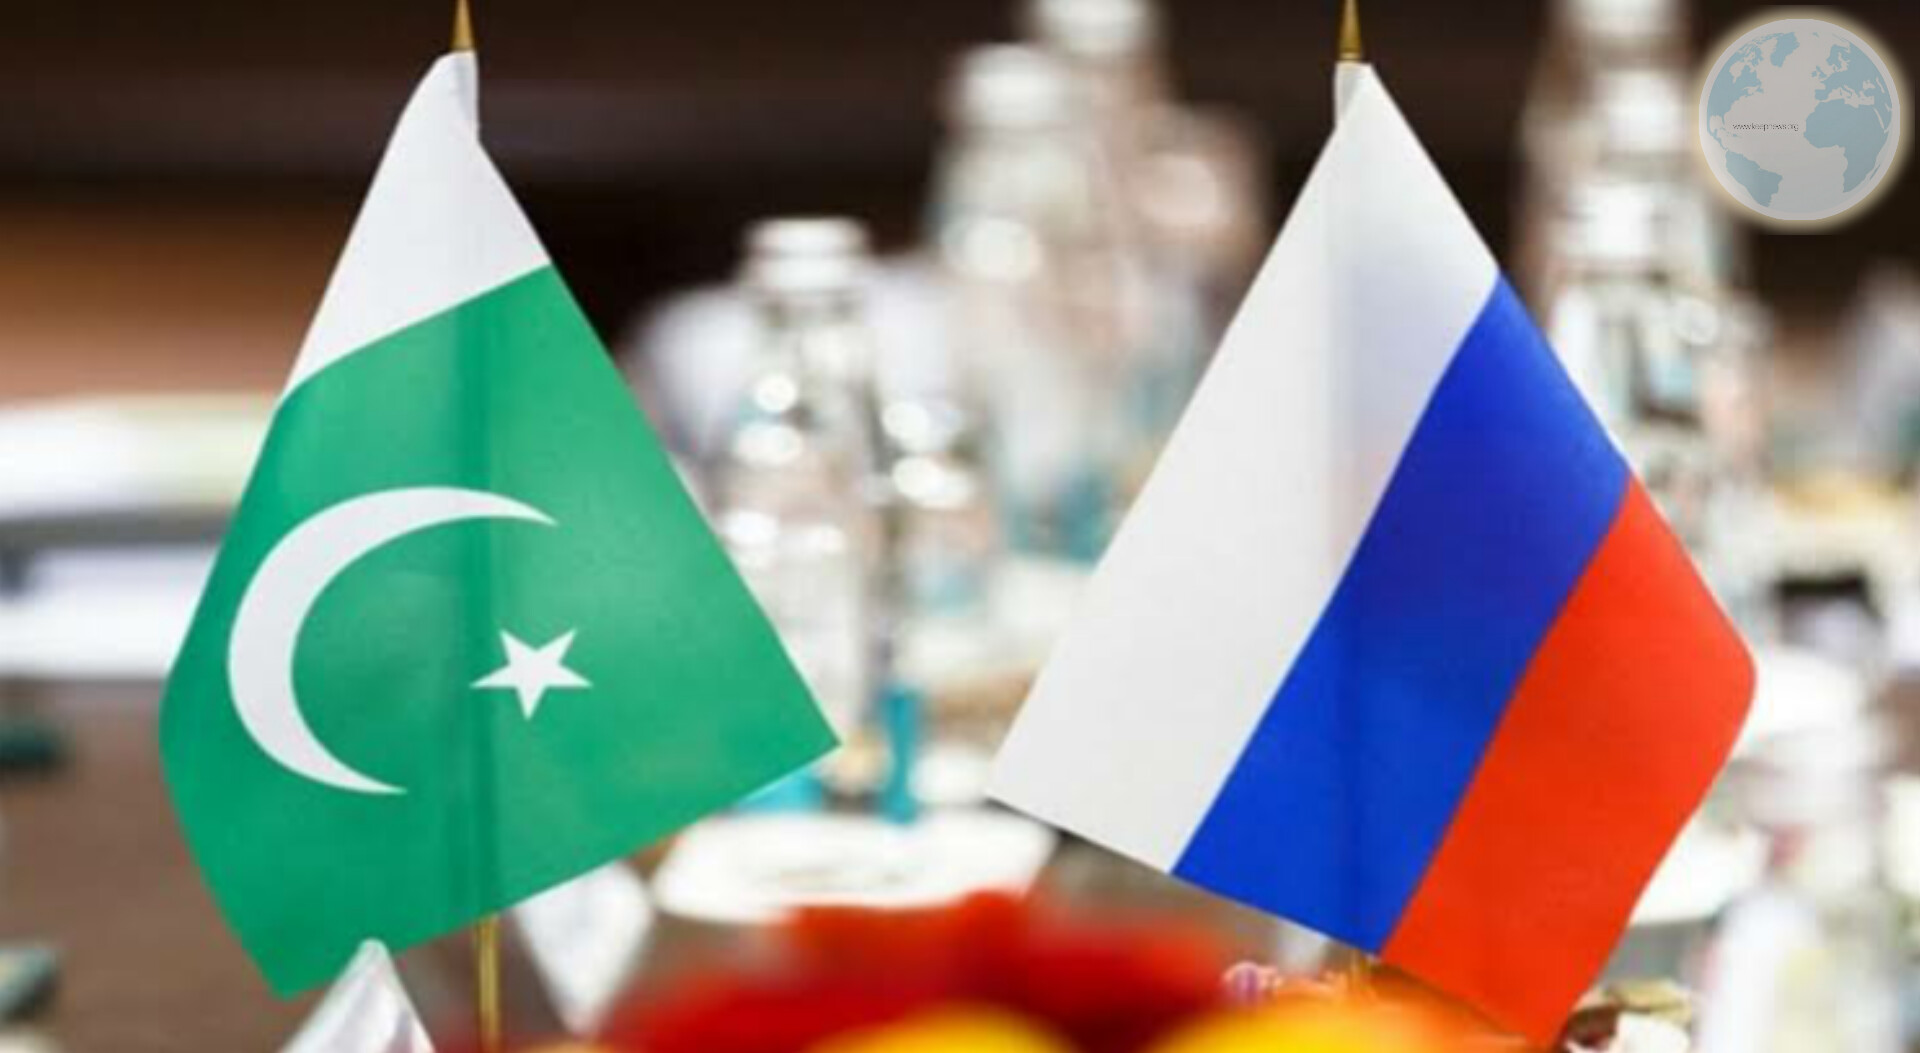 Oil Contract between Russia & Pakistan, in which Currency will Pakistan Pay the Amount?